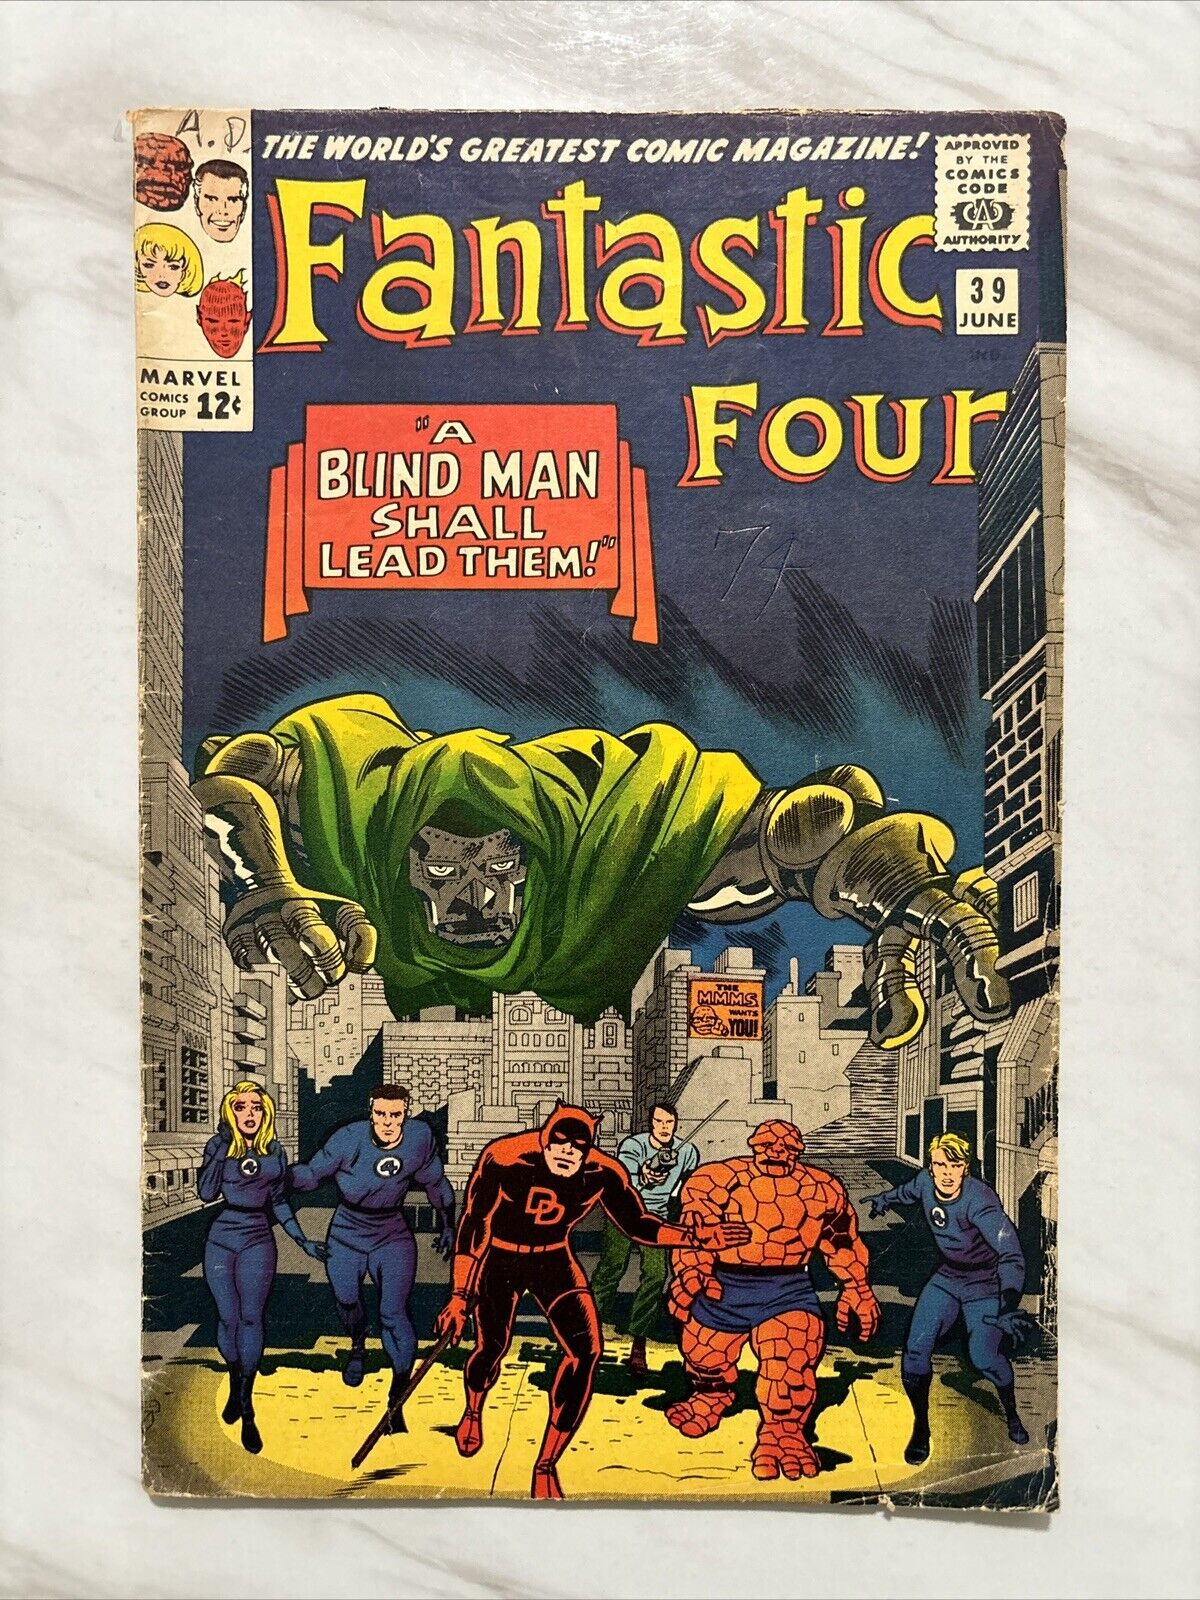 Fantastic Four #39 (1965) VG+ Early FF • Classic Dr. Doom Cover Marvel Comics